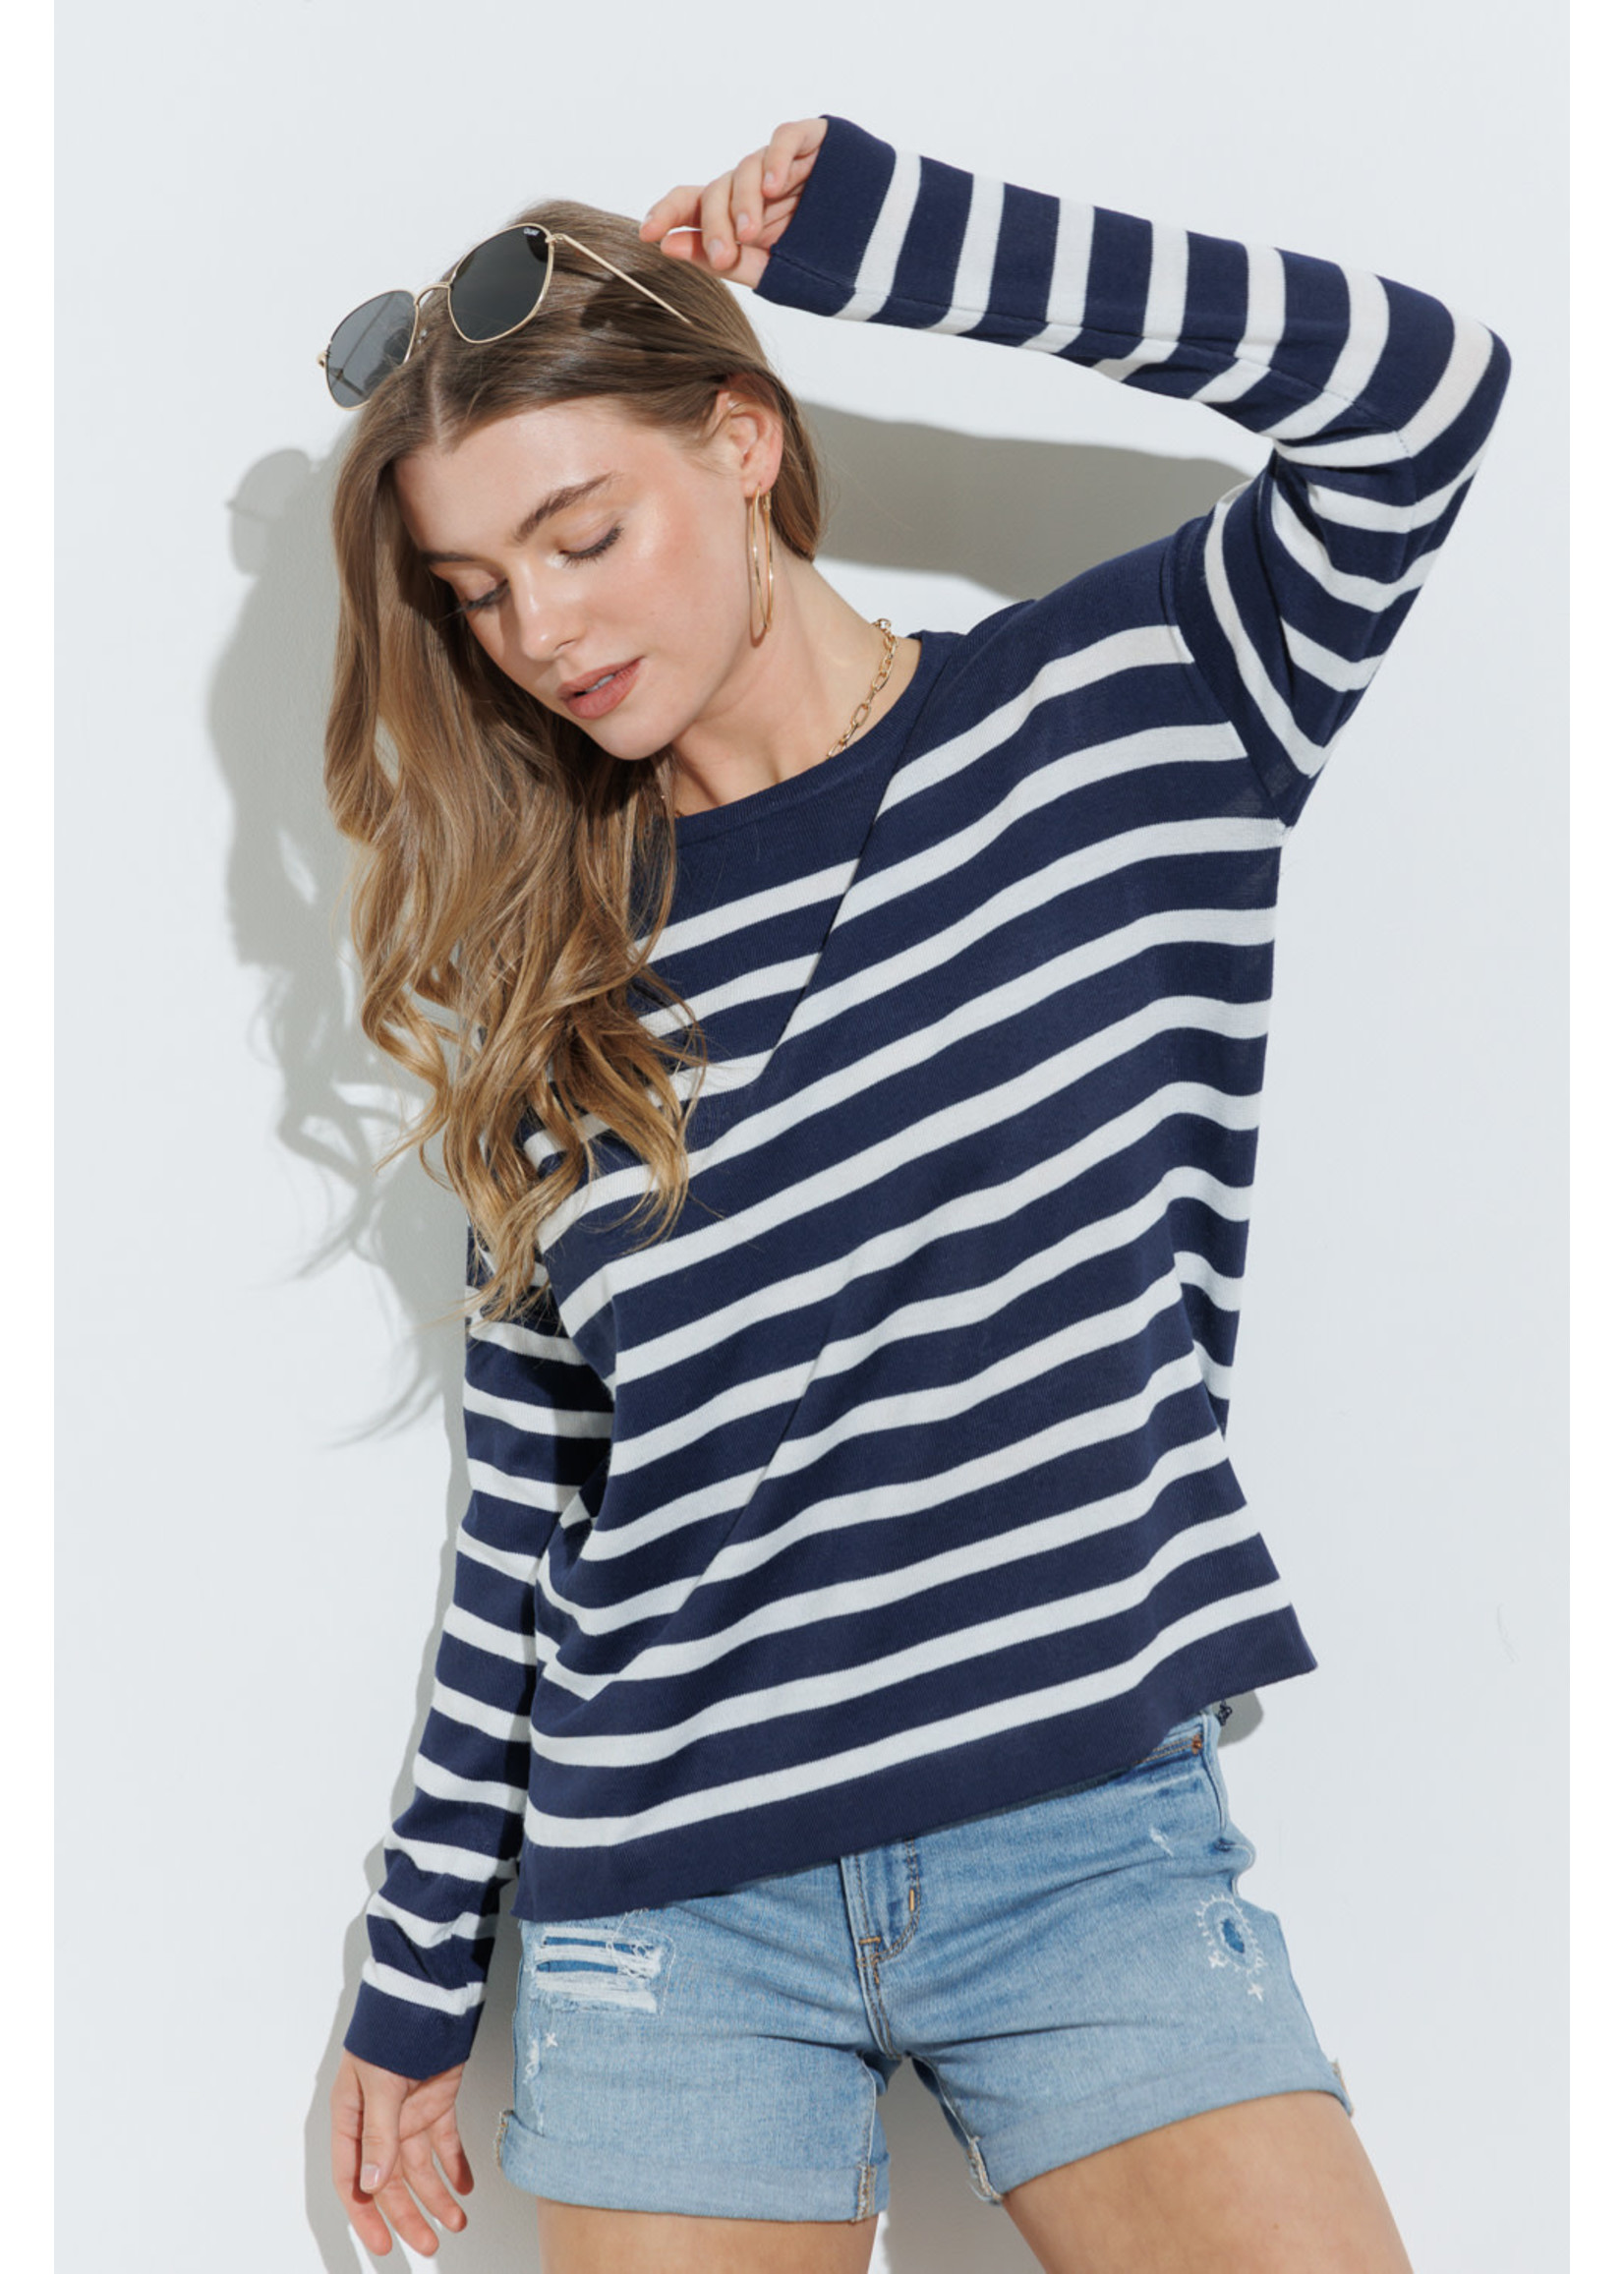 Cozy Co. Light Soft Knit Striped Pullover Sweater- Navy